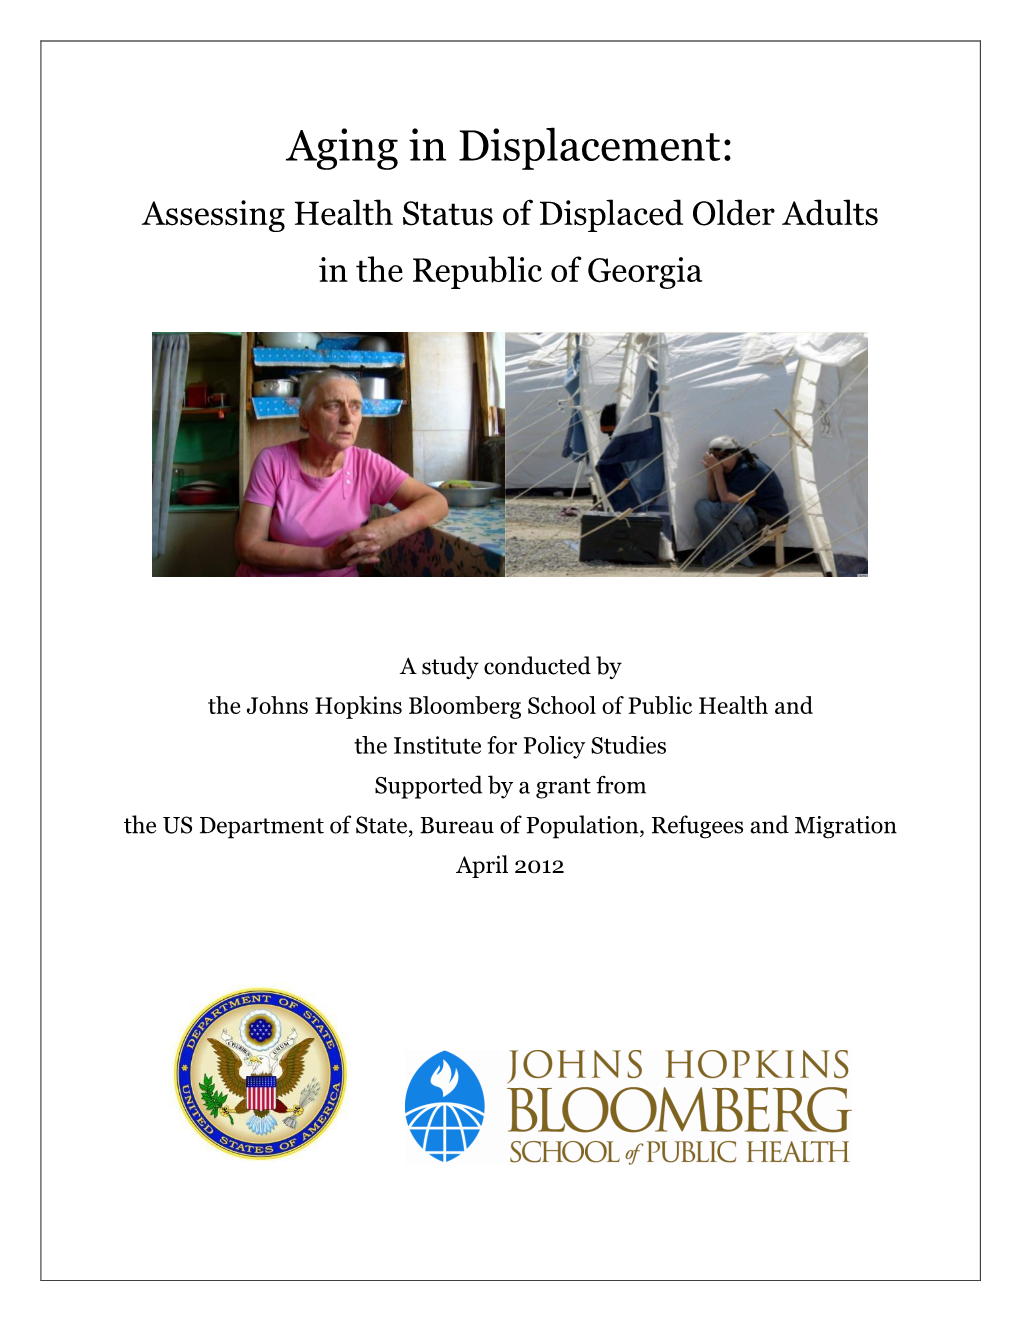 Assessing Health Status of Displaced Older Adults in the Republic of Georgia